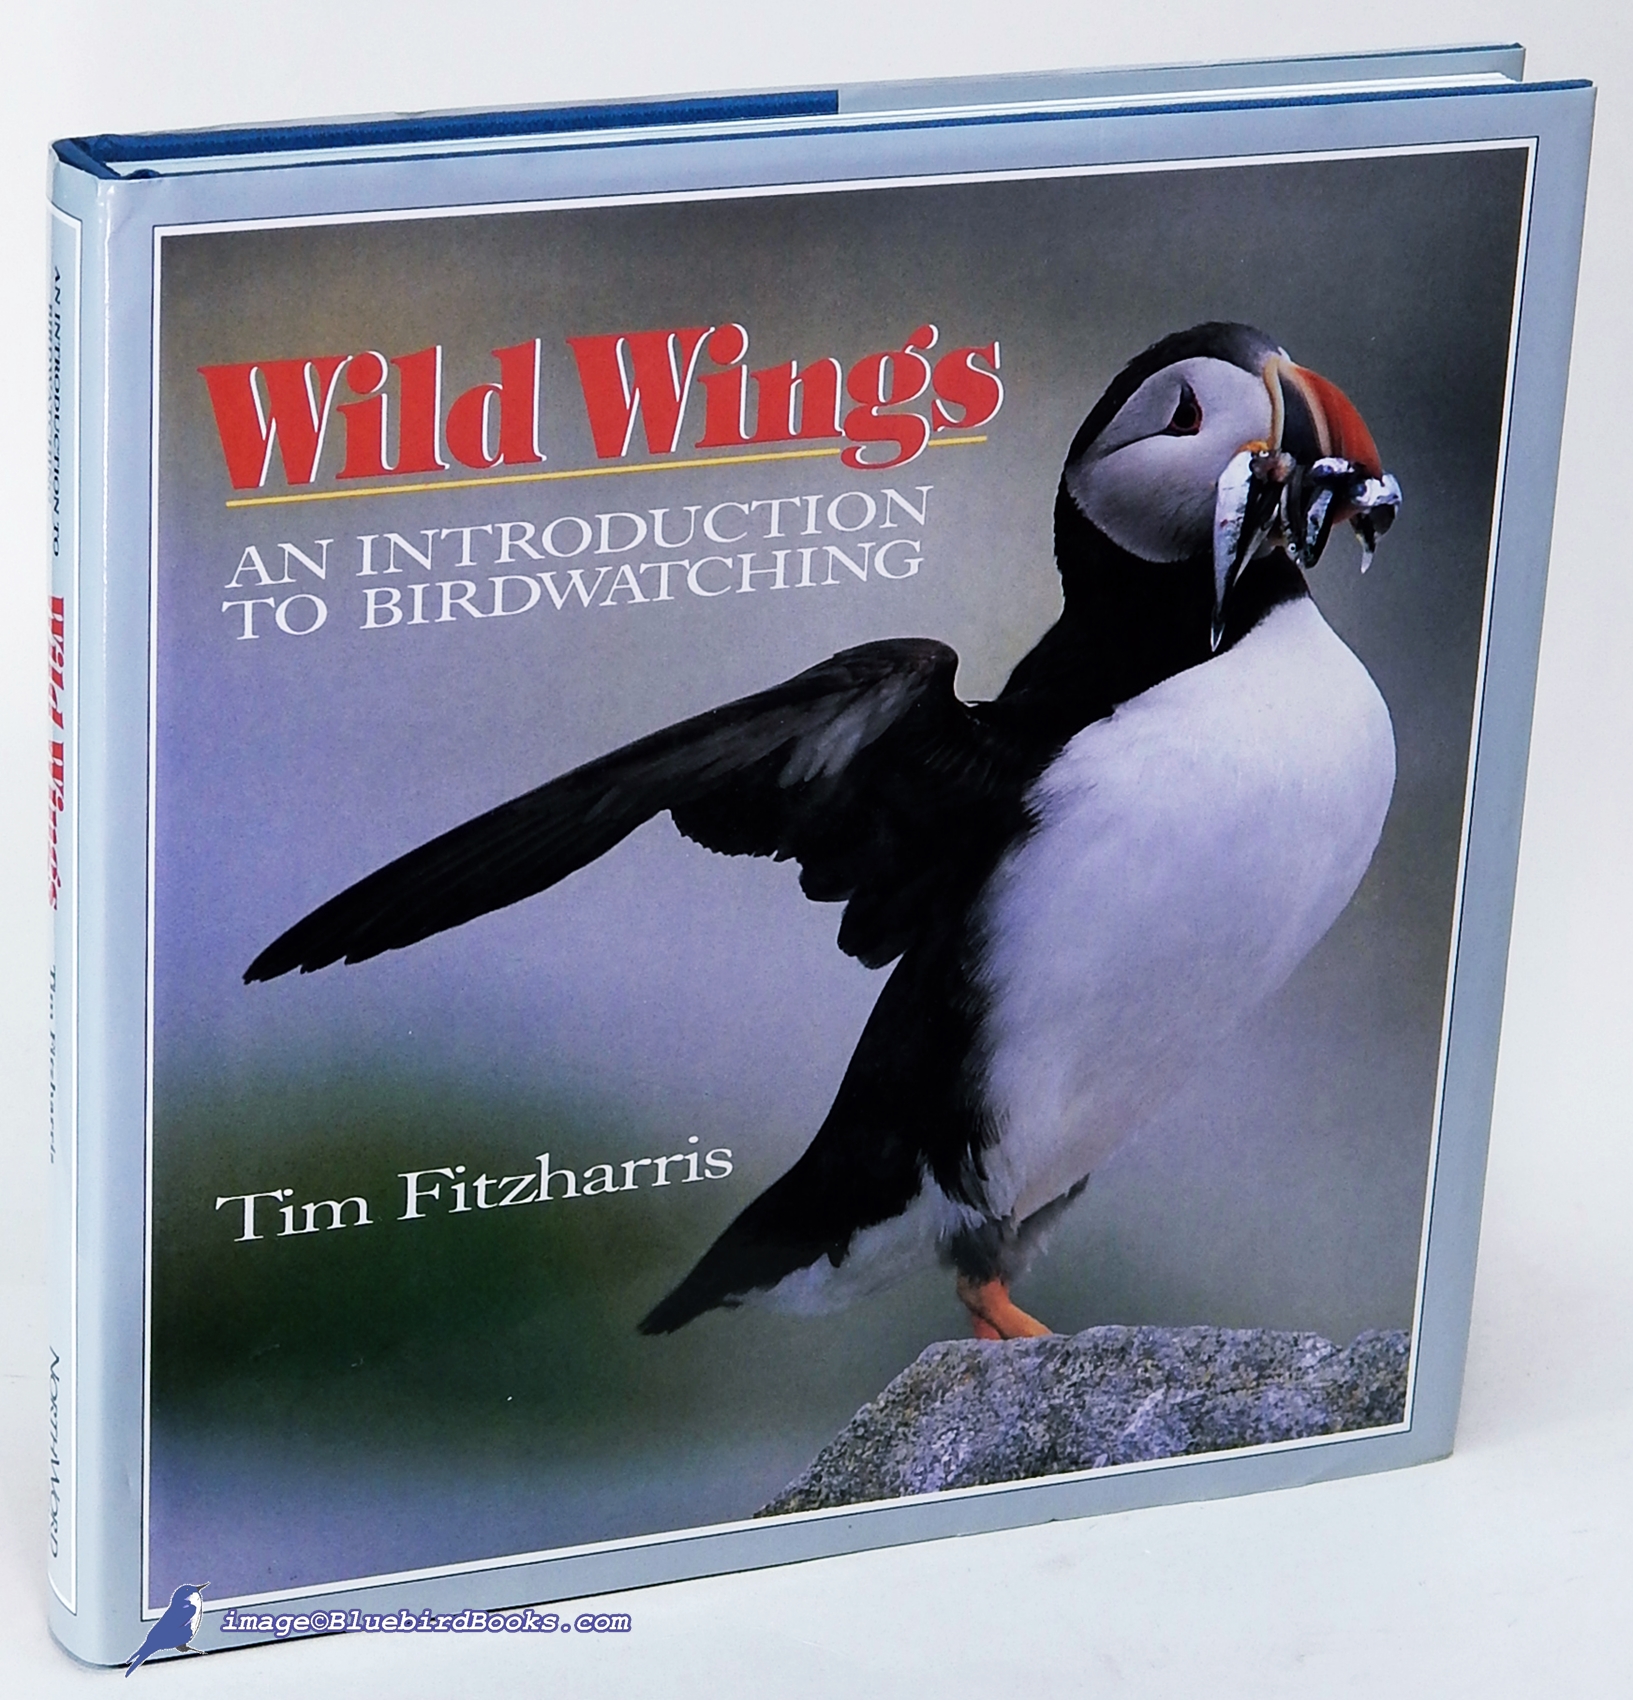 FITZHARRIS, TIM (TEXT AND PHOTOS) - Wild Wings: An Introduction to Birdwatching